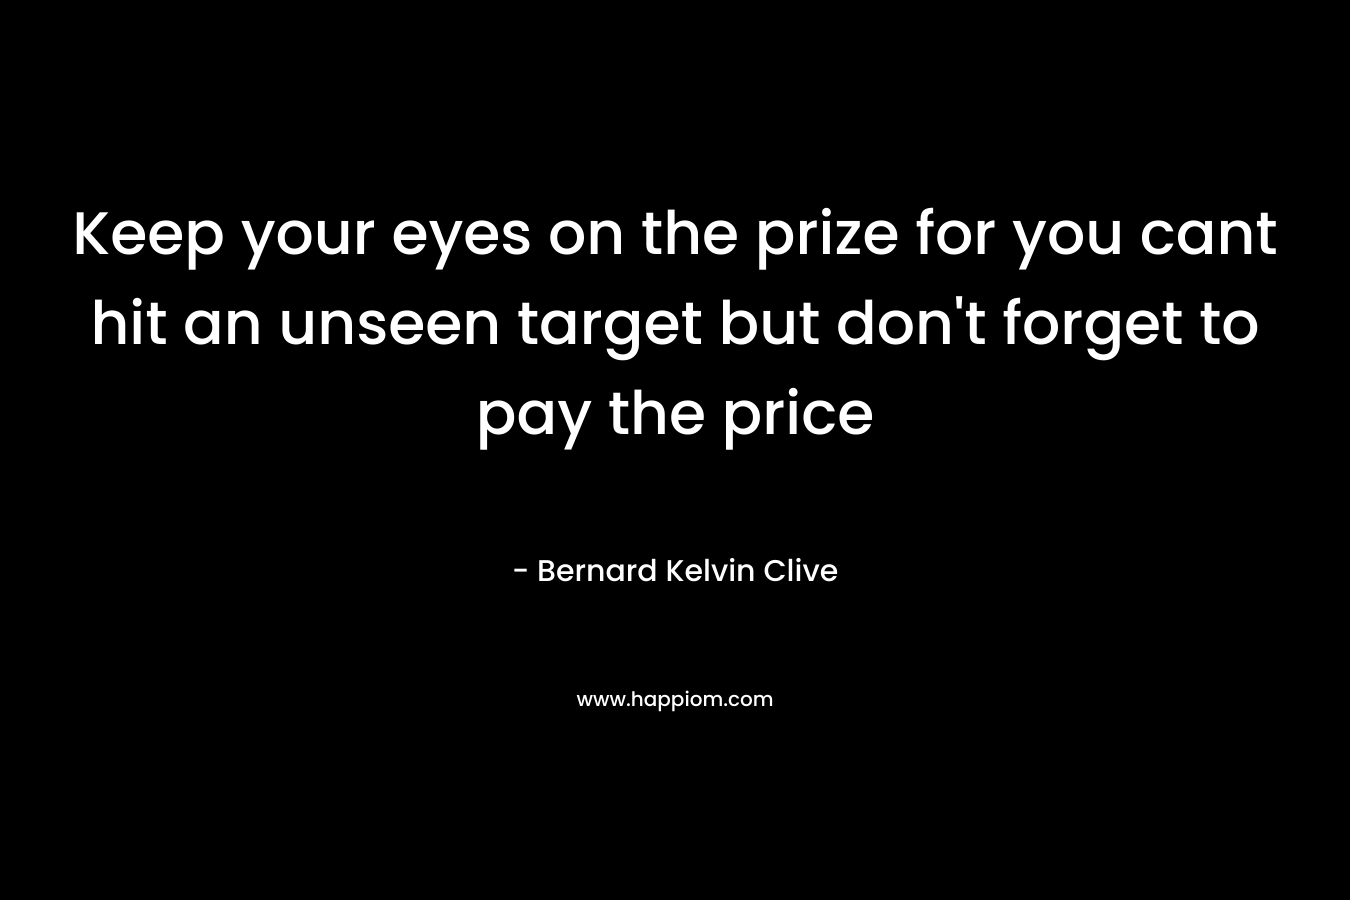 Keep your eyes on the prize for you cant hit an unseen target but don’t forget to pay the price – Bernard Kelvin Clive